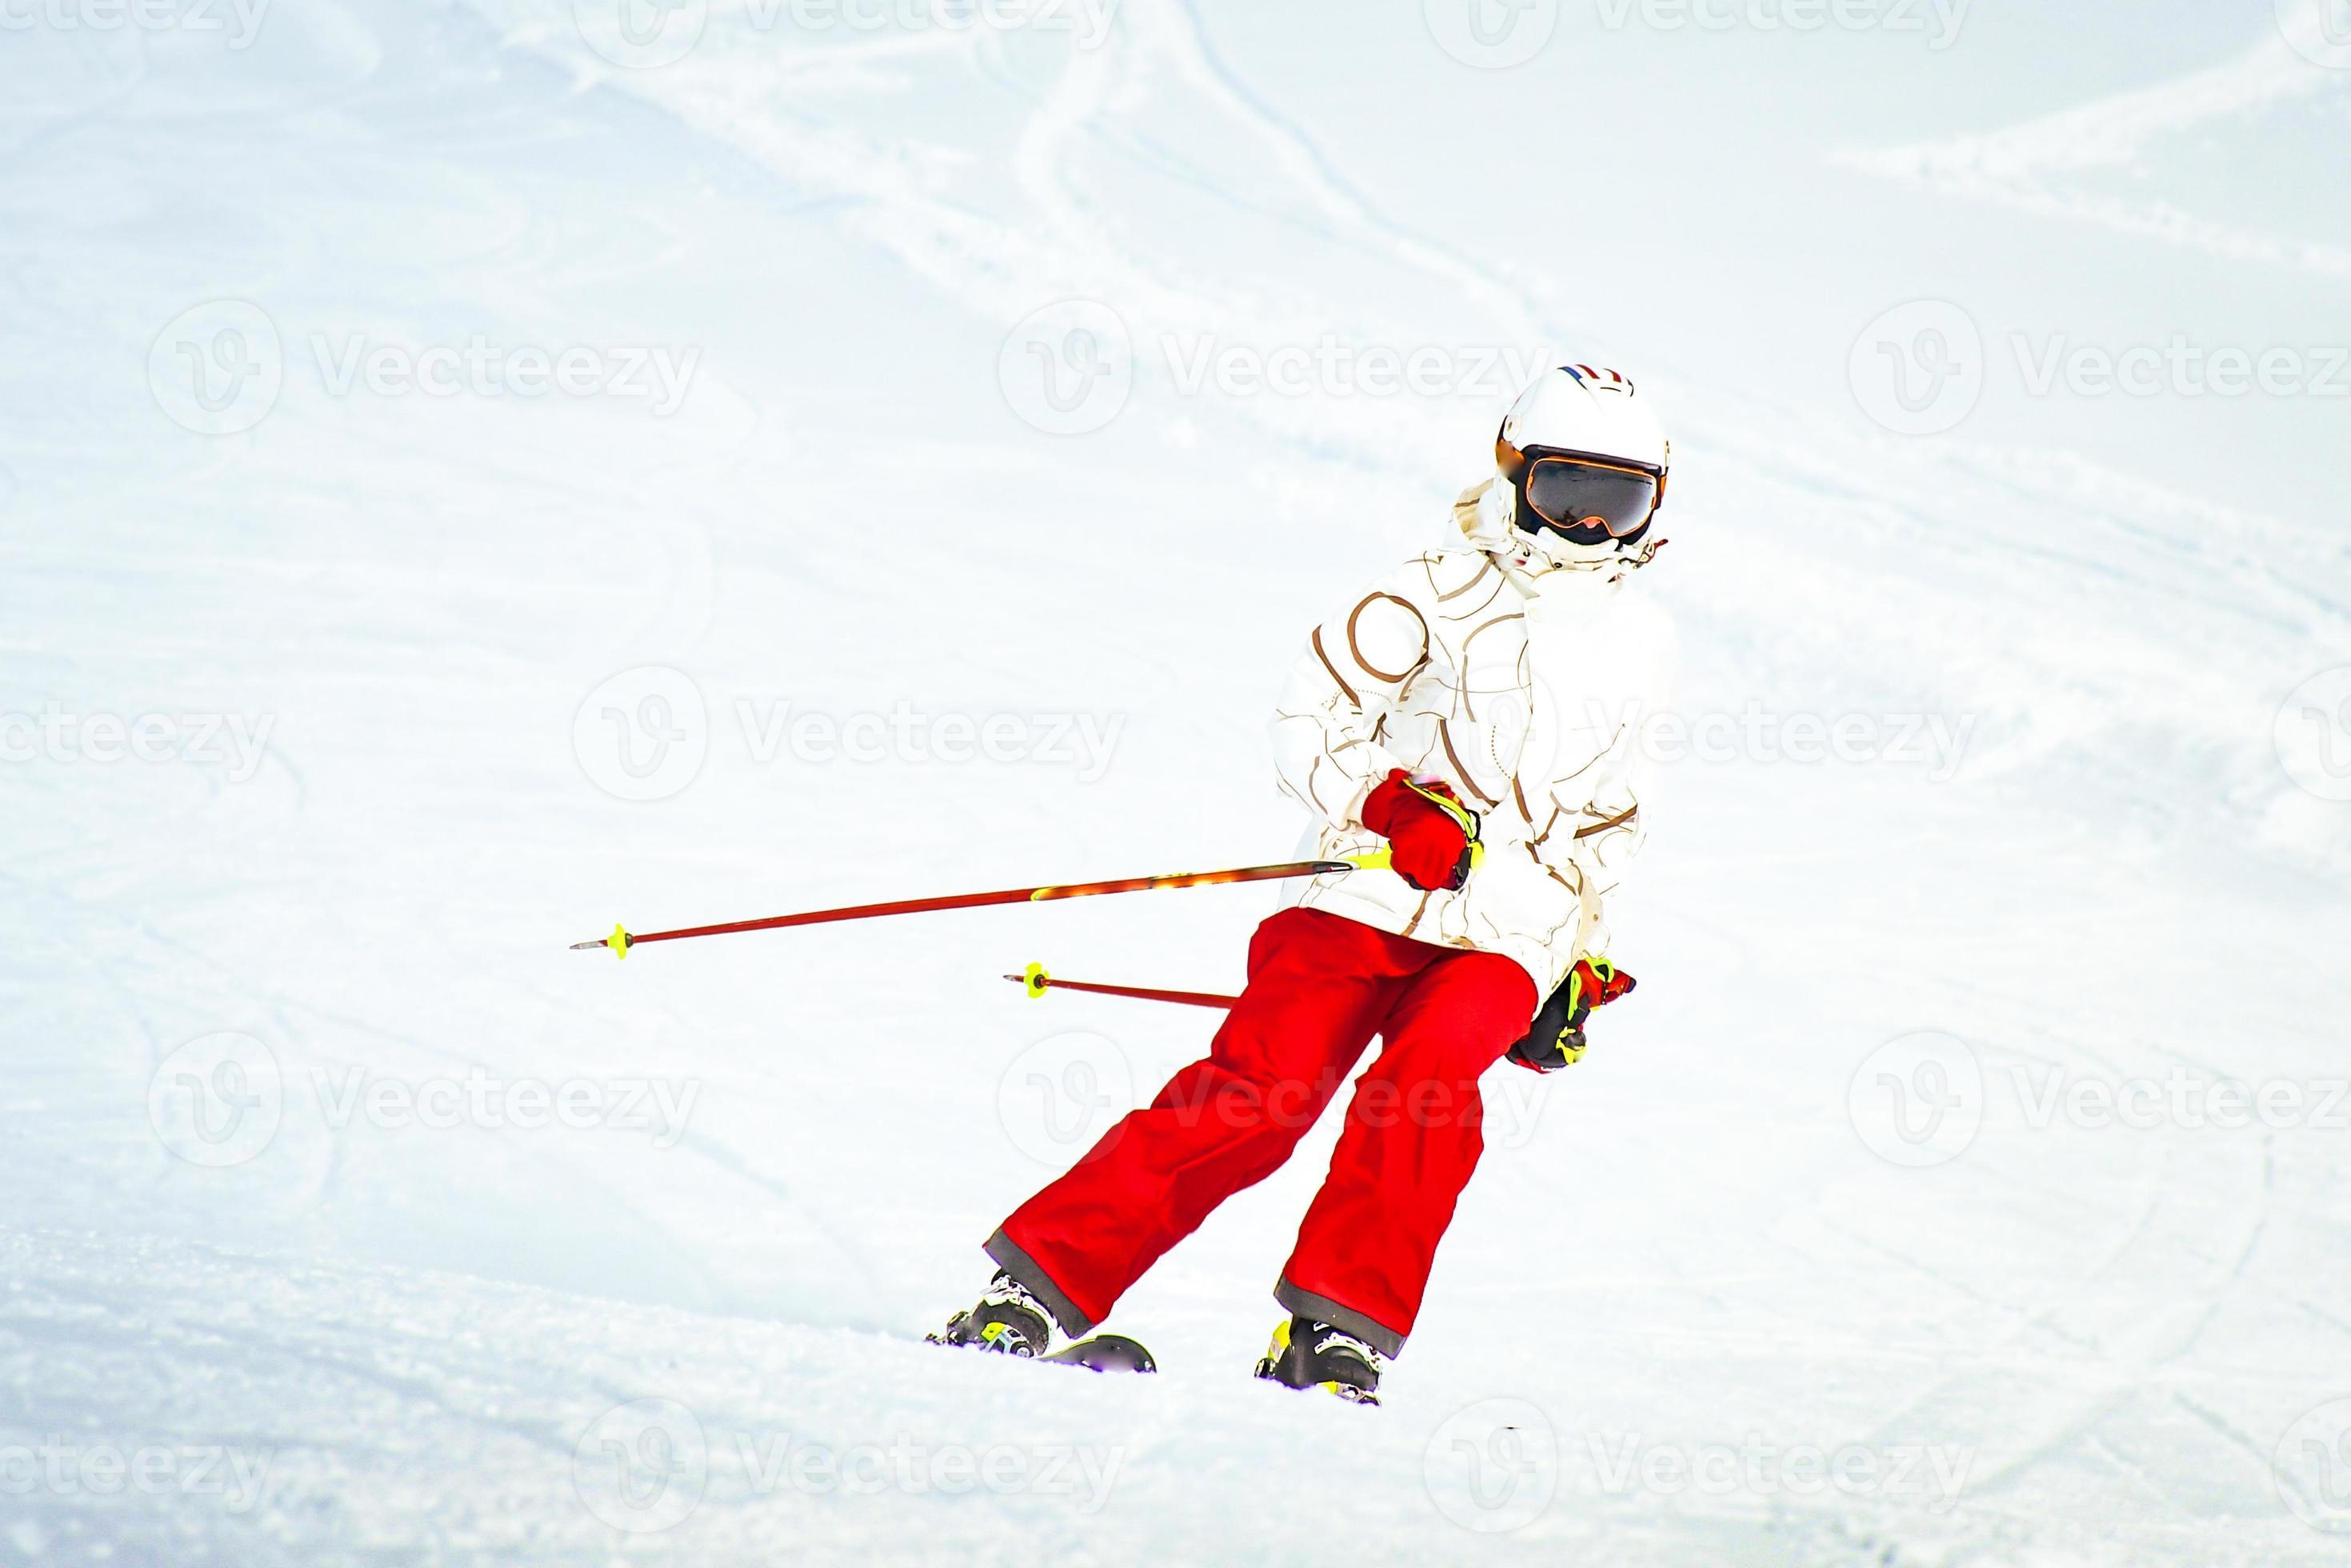 Woman in White Jacket and Black Pants Standing on Snow Covered Ground with  Skis · Free Stock Photo